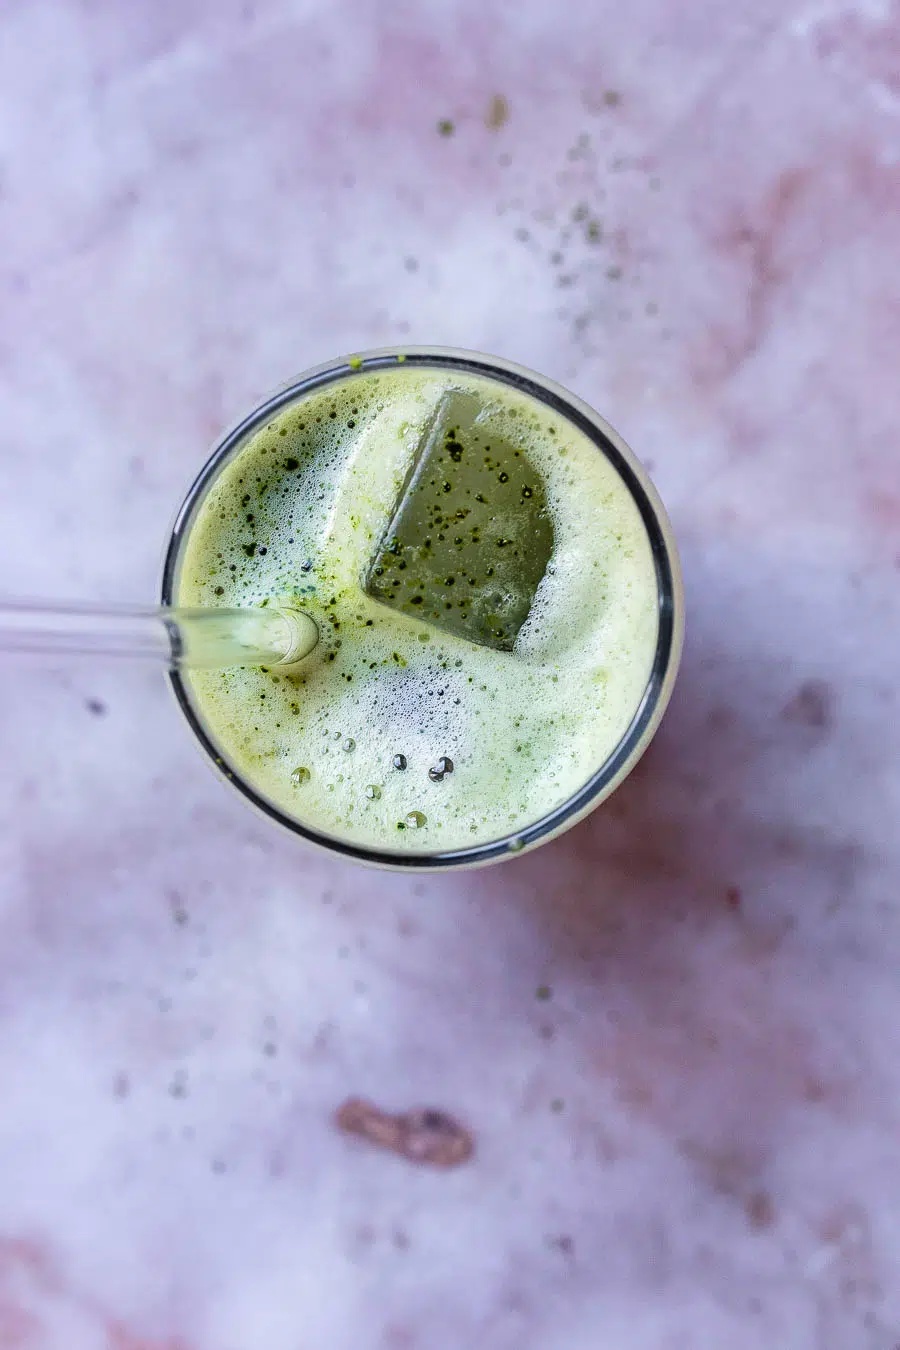 Top view of a purple work top with a glass filled with iced matcha and ice, with a clear straw in it.